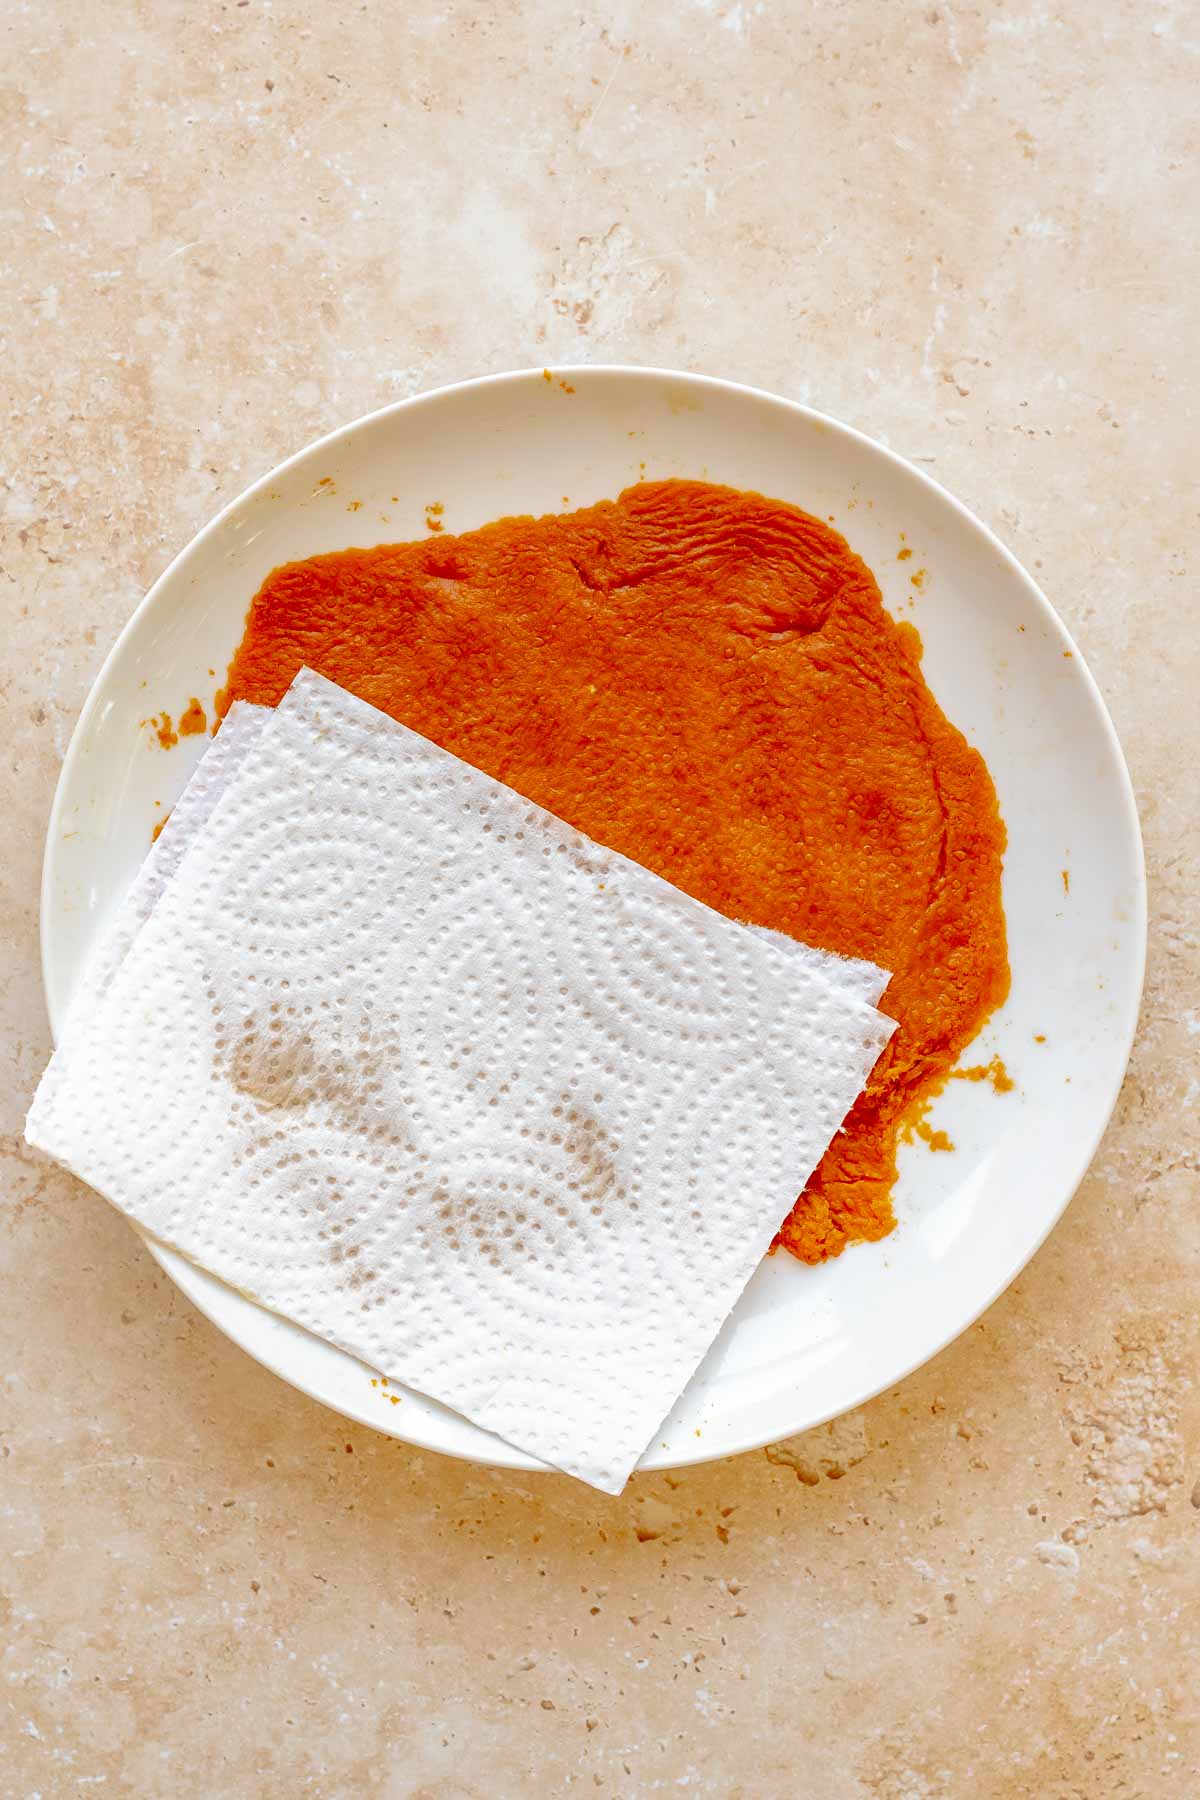 A paper towel is barely saturated from removing water from pumpkin puree on a plate.